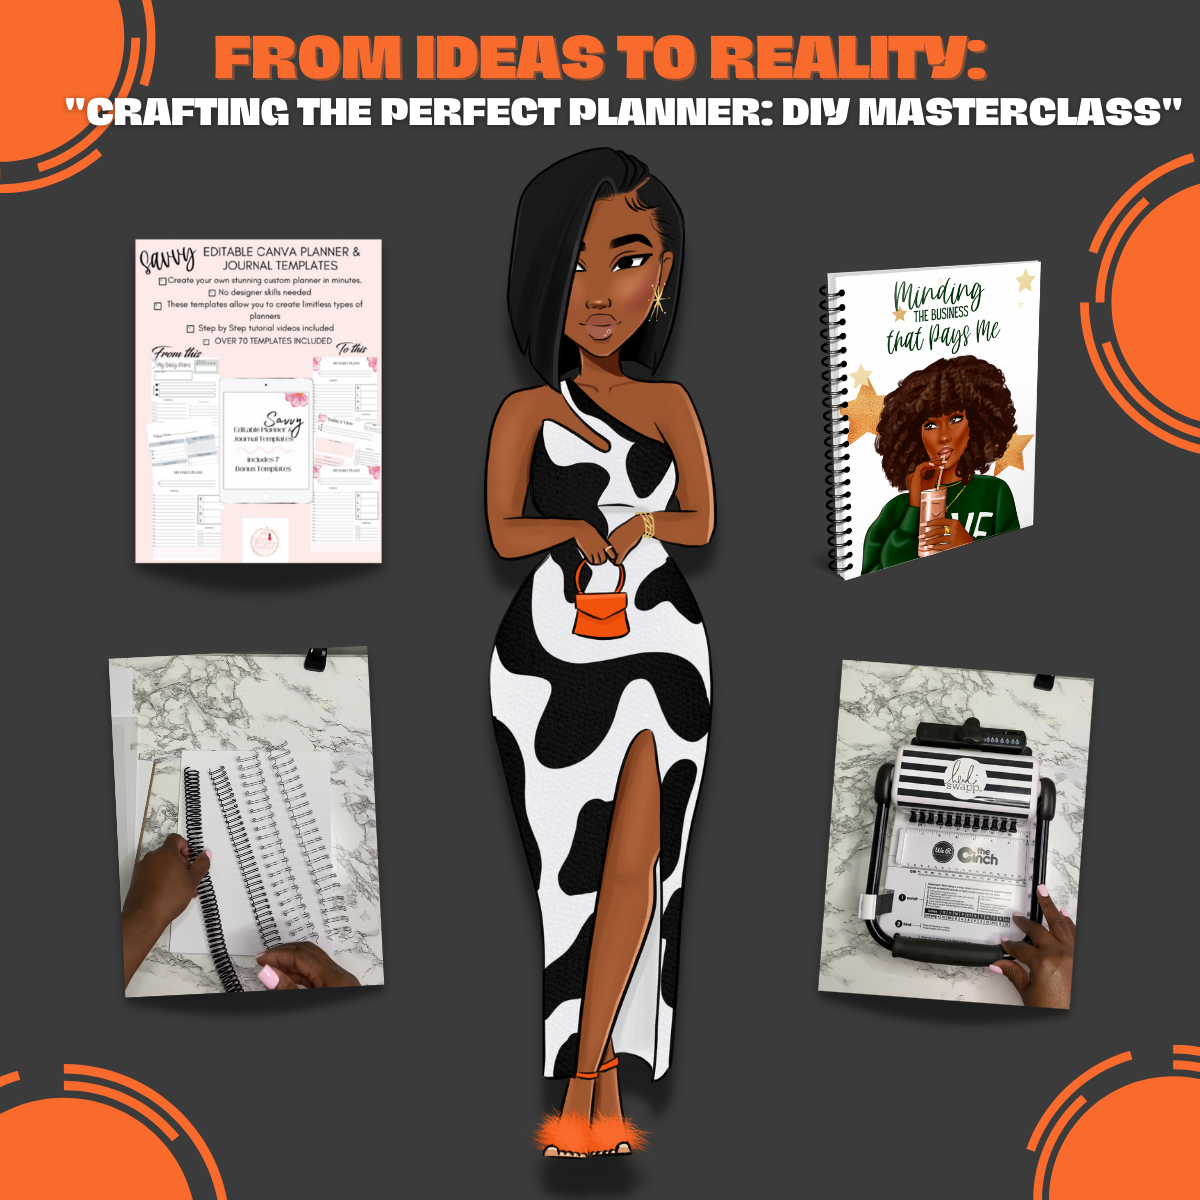 "From Ideas to Reality Crafting the Perfect Planner: DIY Masterclass"